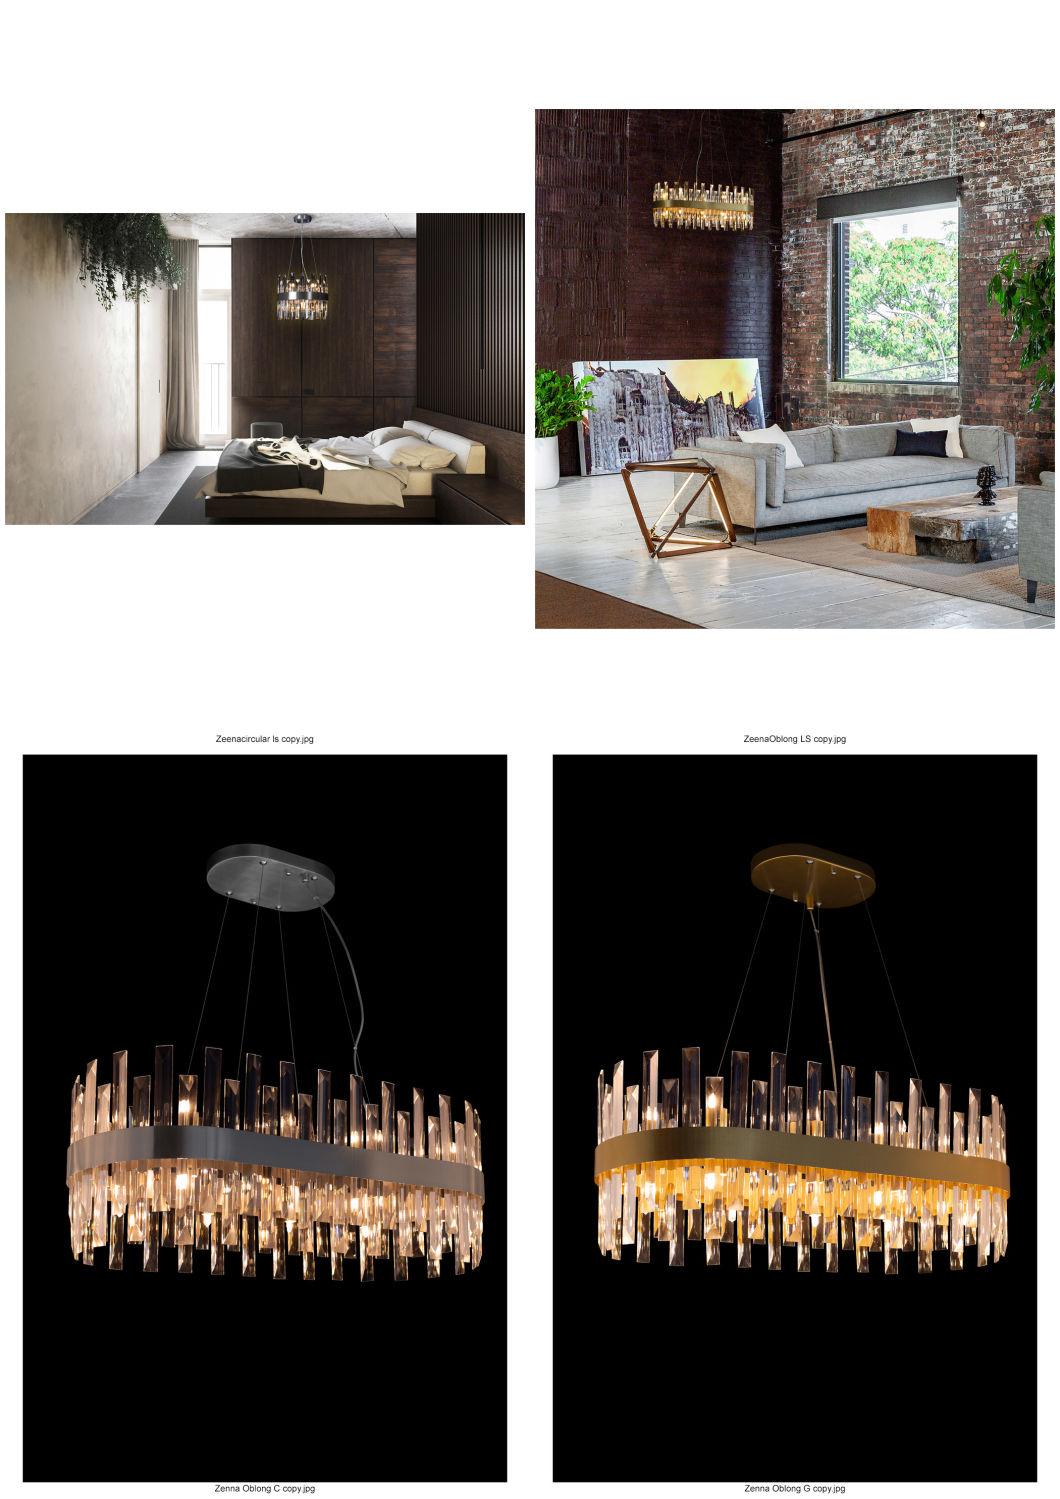 CE European Hot Selling Luxury Round Gold LED Crystal Pendant Light Decoration Modern Rectangle Chandelier Decor Hanging Lamp for Villa Hotel Project Lighting